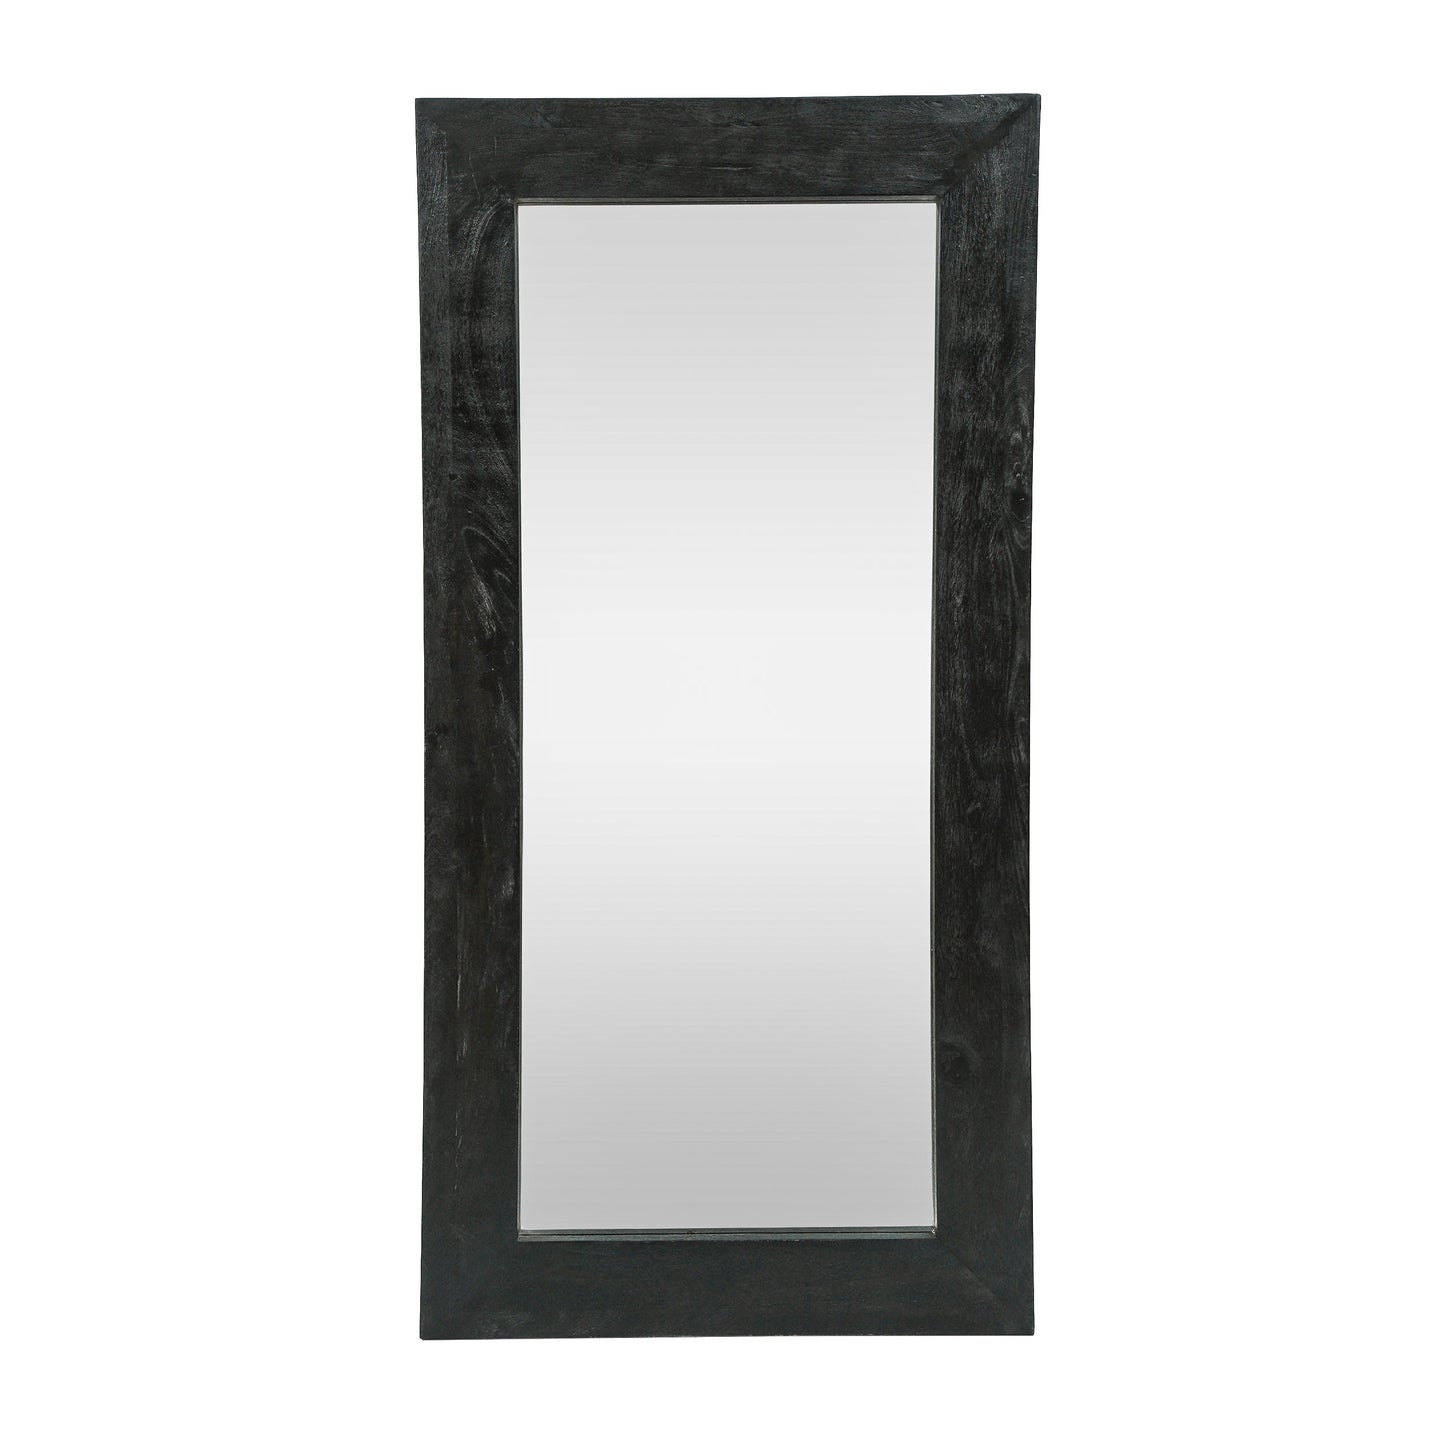 Ramsay Rustic Handcrafted Mango Wood Full Length Standing Mirror, Black and Brown